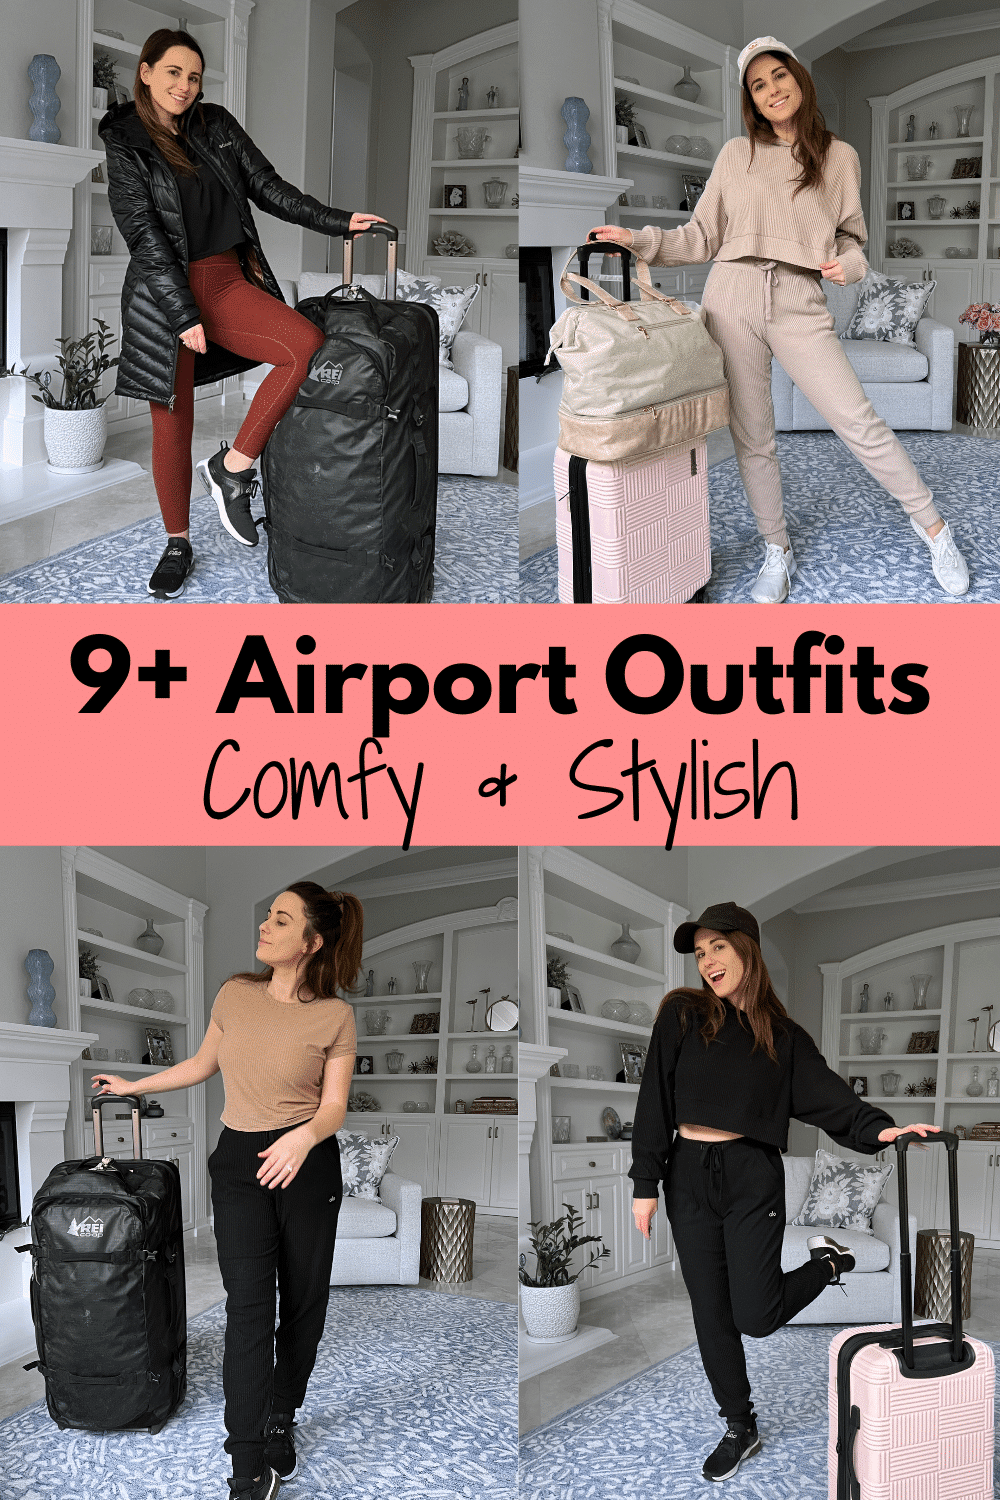 What to wear travelling: The best outfits for the airport + long